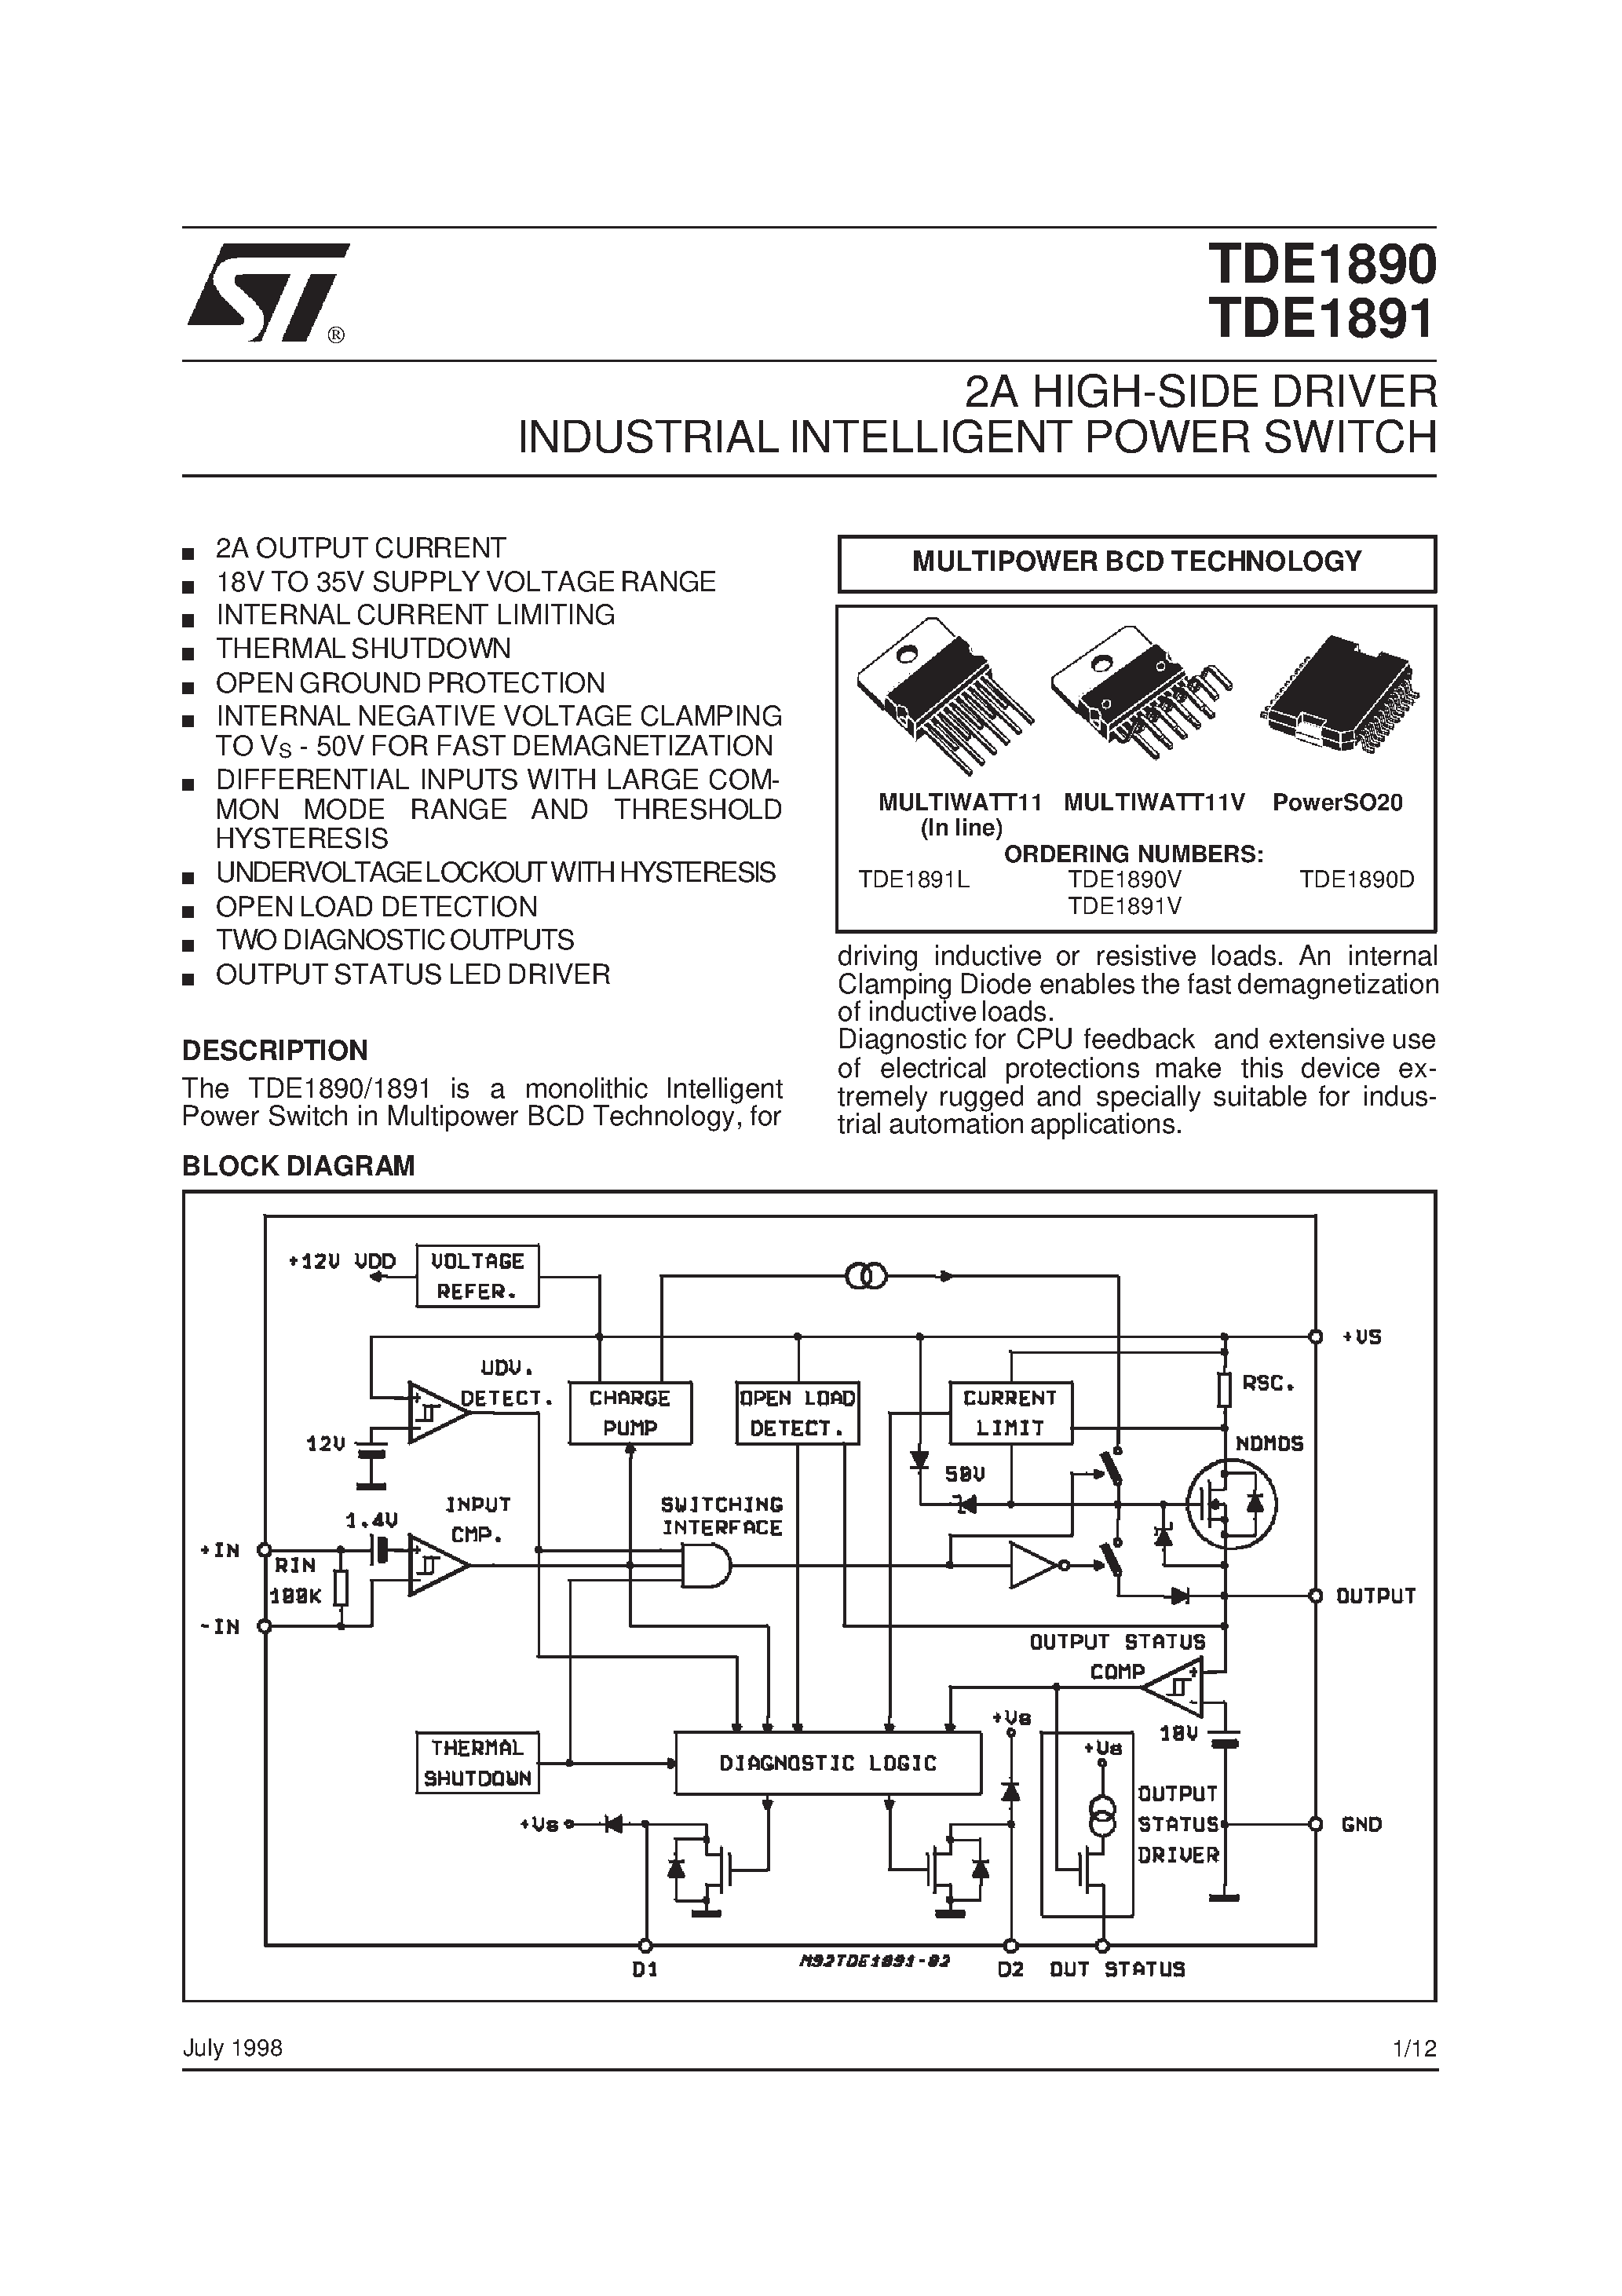 Даташит TDE1891-2A HIGH-SIDE DRIVER INDUSTRIAL INTELLIGENT POWER SWITCH страница 1